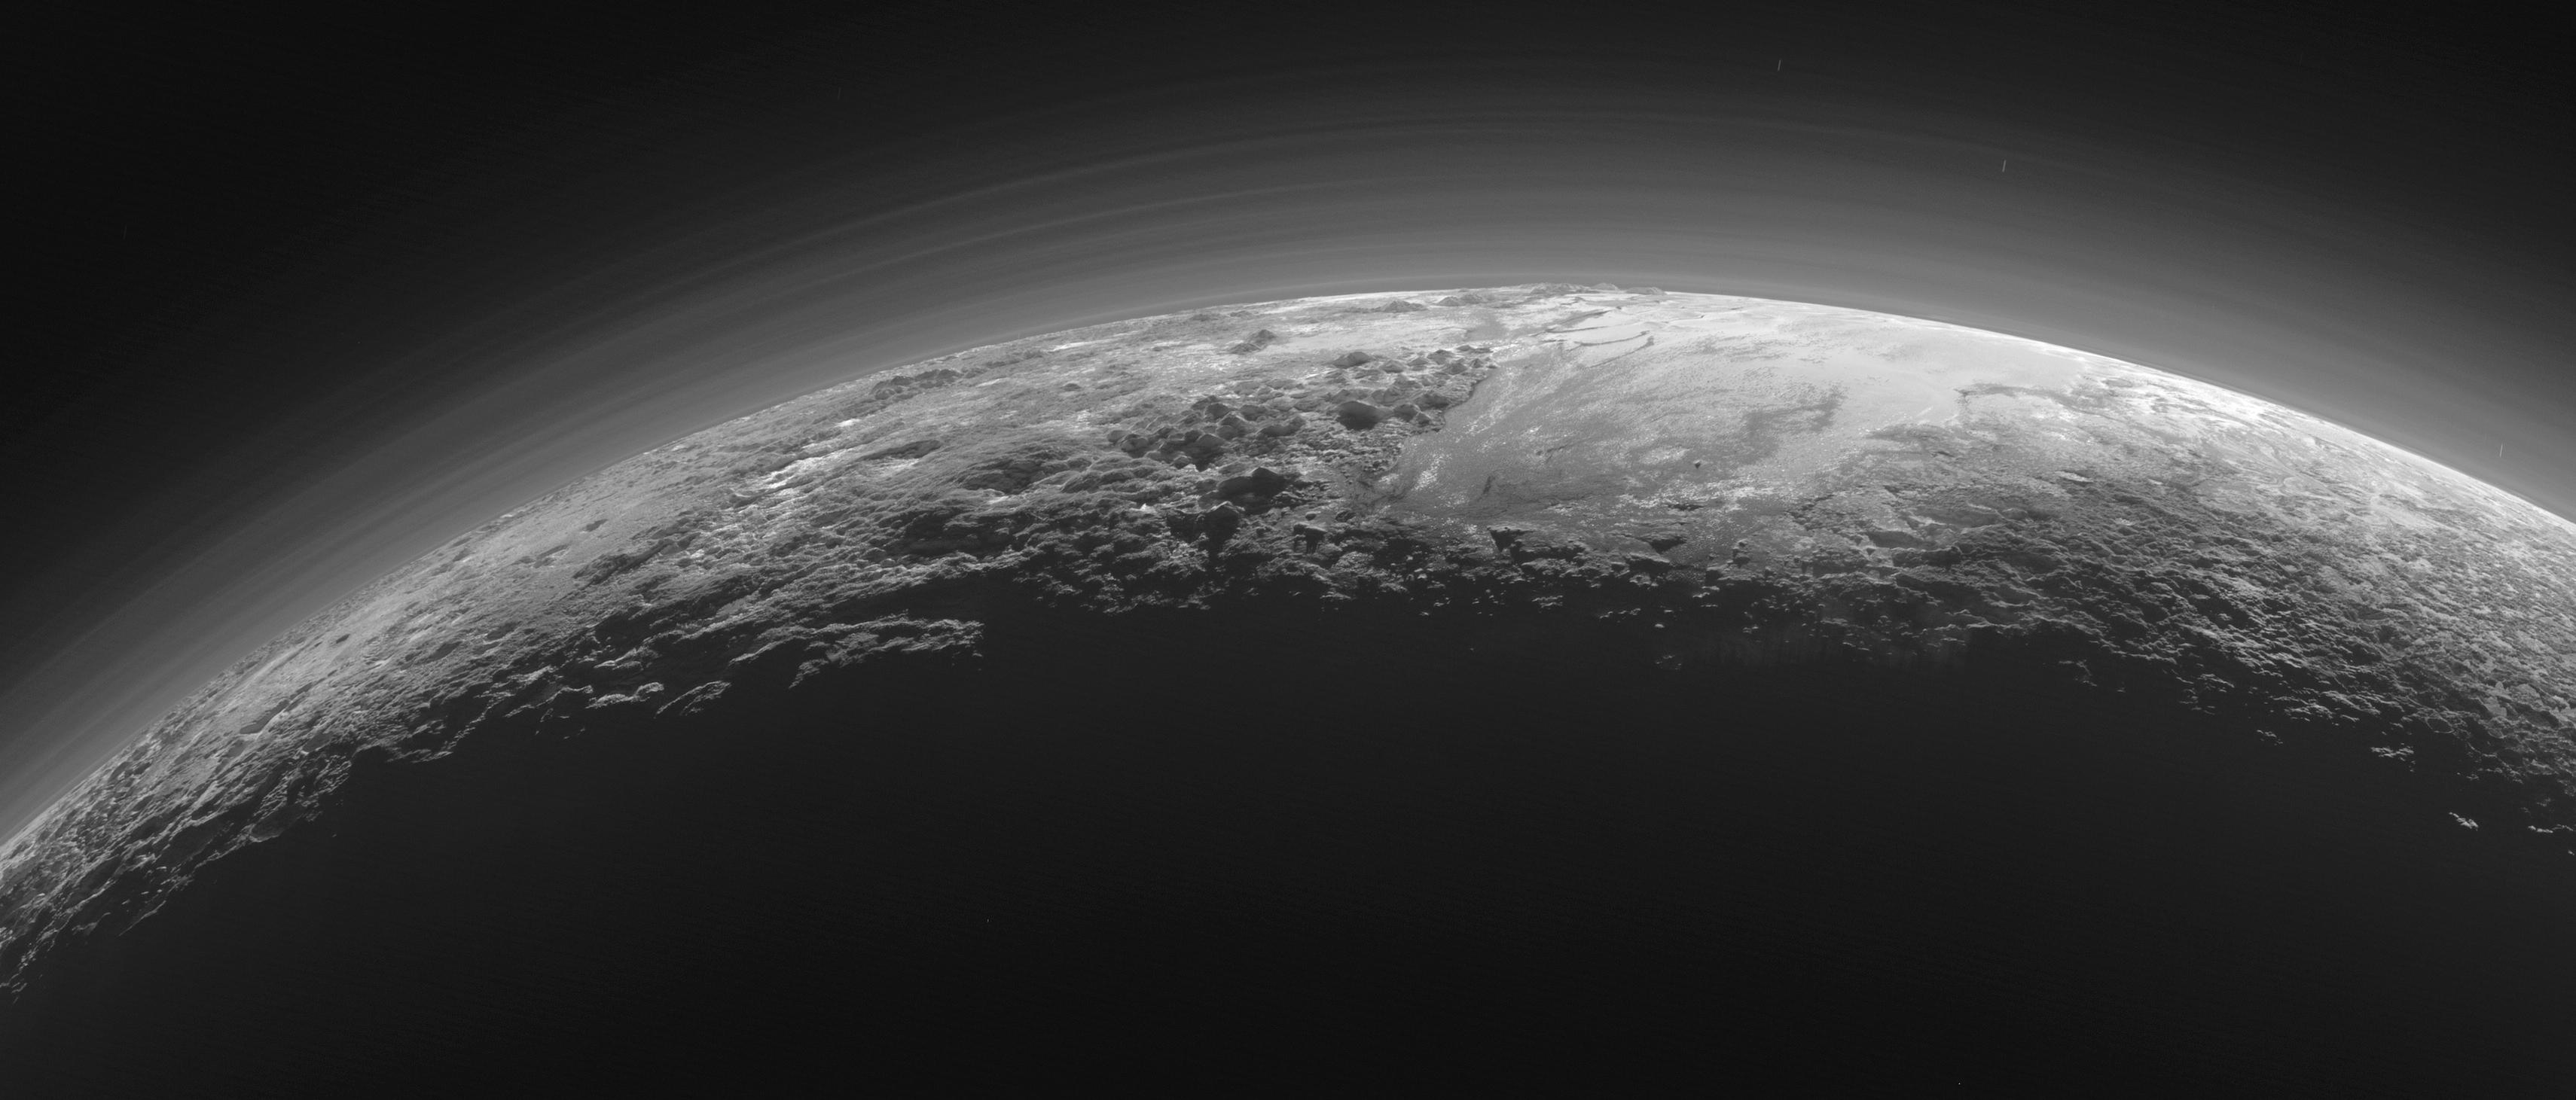 Just 15 minutes after its closest approach to Pluto on July 14, 2015, NASA's New Horizons spacecraft looked back toward the sun and captured this near-sunset view of the rugged, icy mountains and flat ice plains extending to Pluto's horizon.